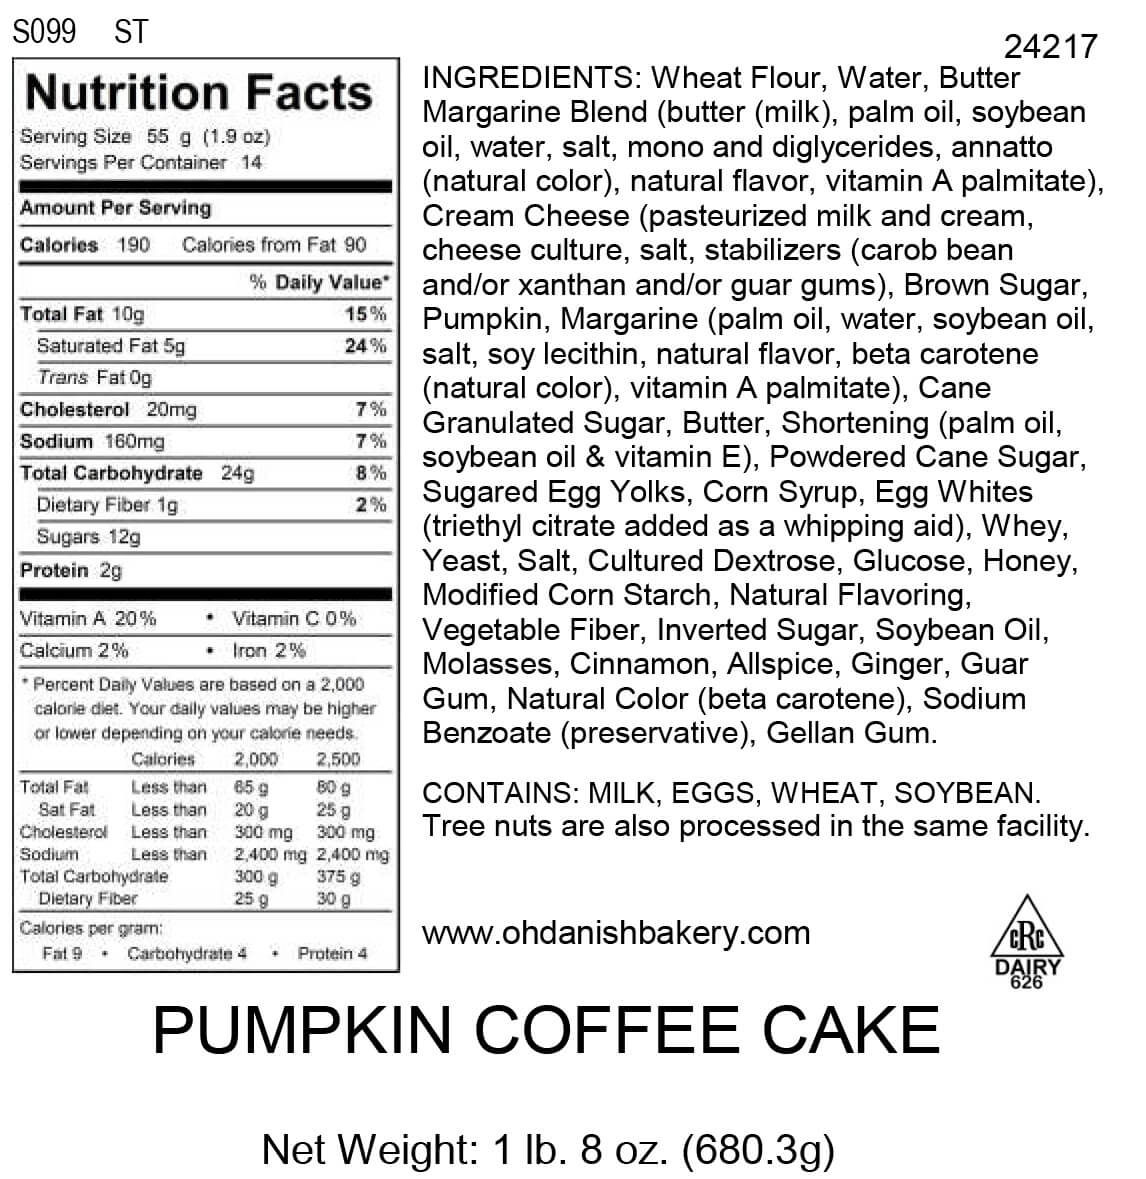 Nutritional Label for Pumpkin Coffee Cake